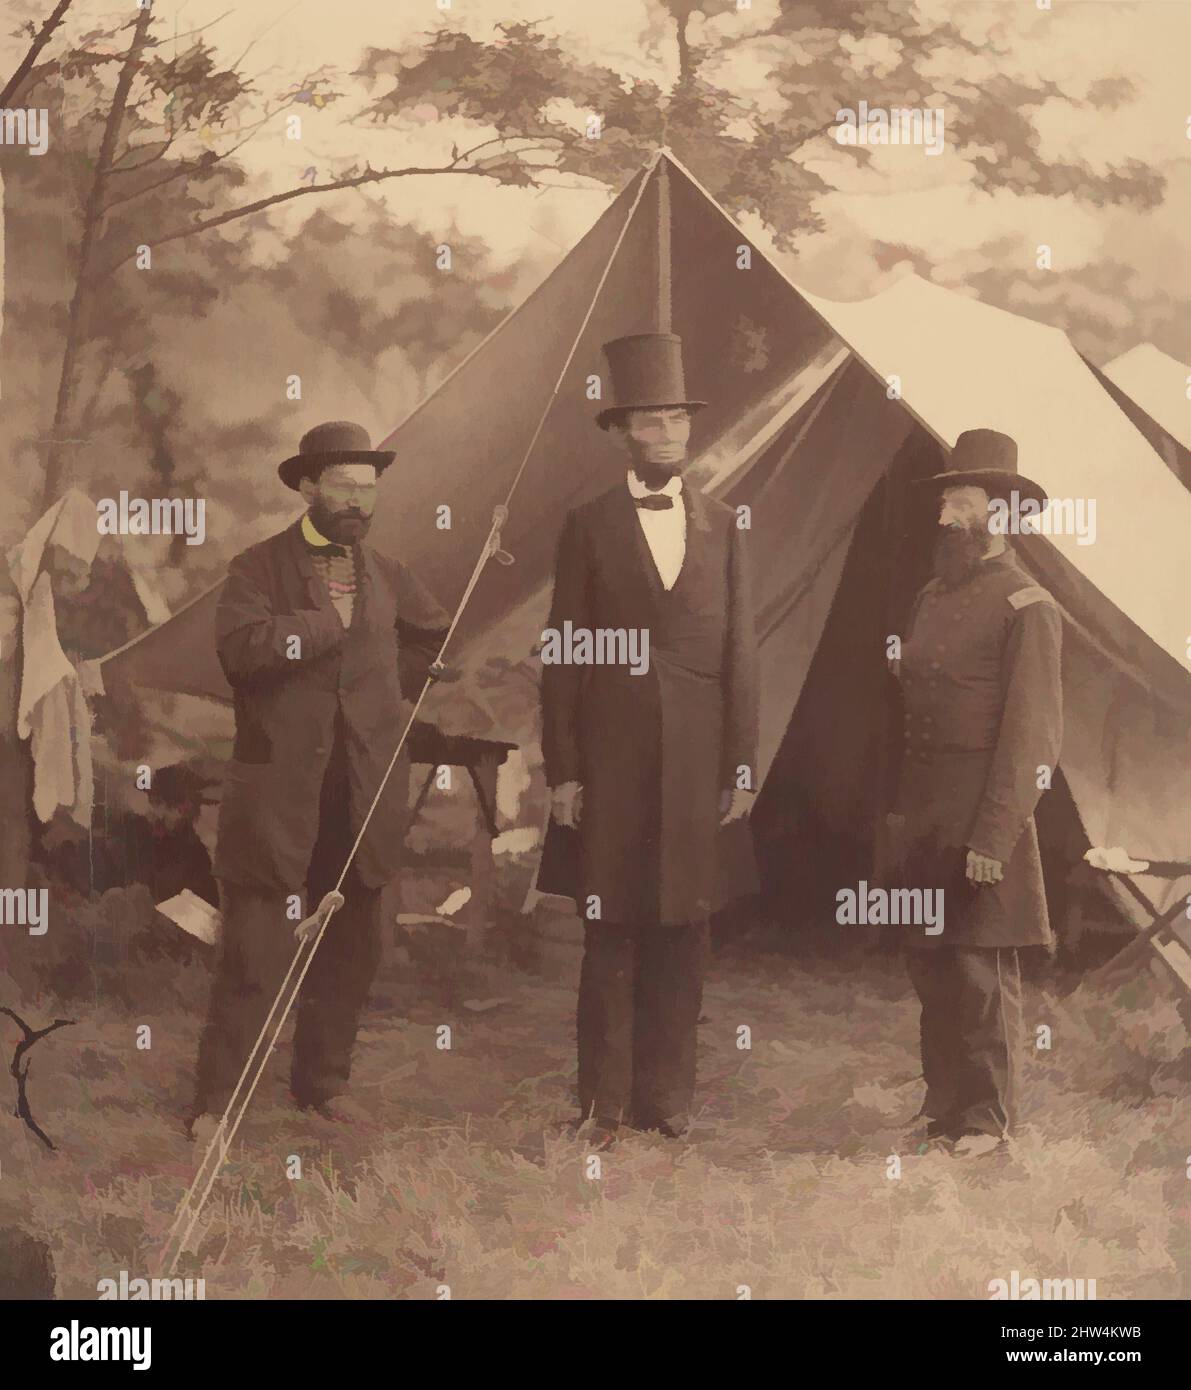 Art inspired by President Abraham Lincoln, Major General John A. McClernand (right), and E. J. Allen (Allan Pinkerton, left), Chief of the Secret Service of the United States, at Secret Service Department, Headquarters Army of the Potomac, near Antietam, Maryland, October 3, 1862, Classic works modernized by Artotop with a splash of modernity. Shapes, color and value, eye-catching visual impact on art. Emotions through freedom of artworks in a contemporary way. A timeless message pursuing a wildly creative new direction. Artists turning to the digital medium and creating the Artotop NFT Stock Photo